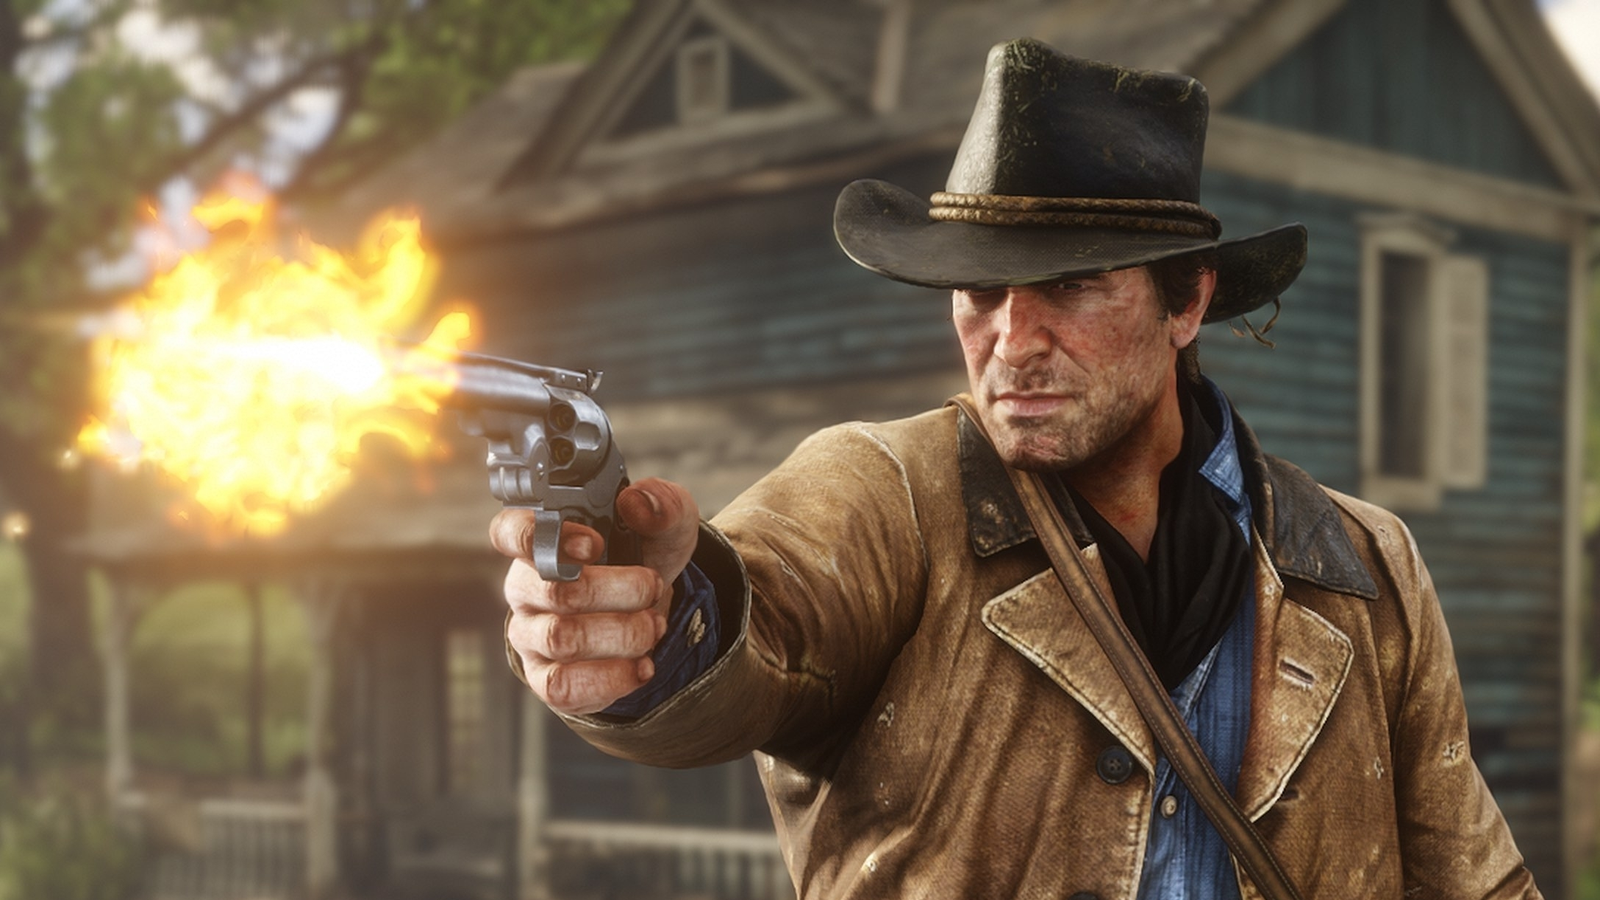 How to play Red Dead Redemption on PC: A complete guide